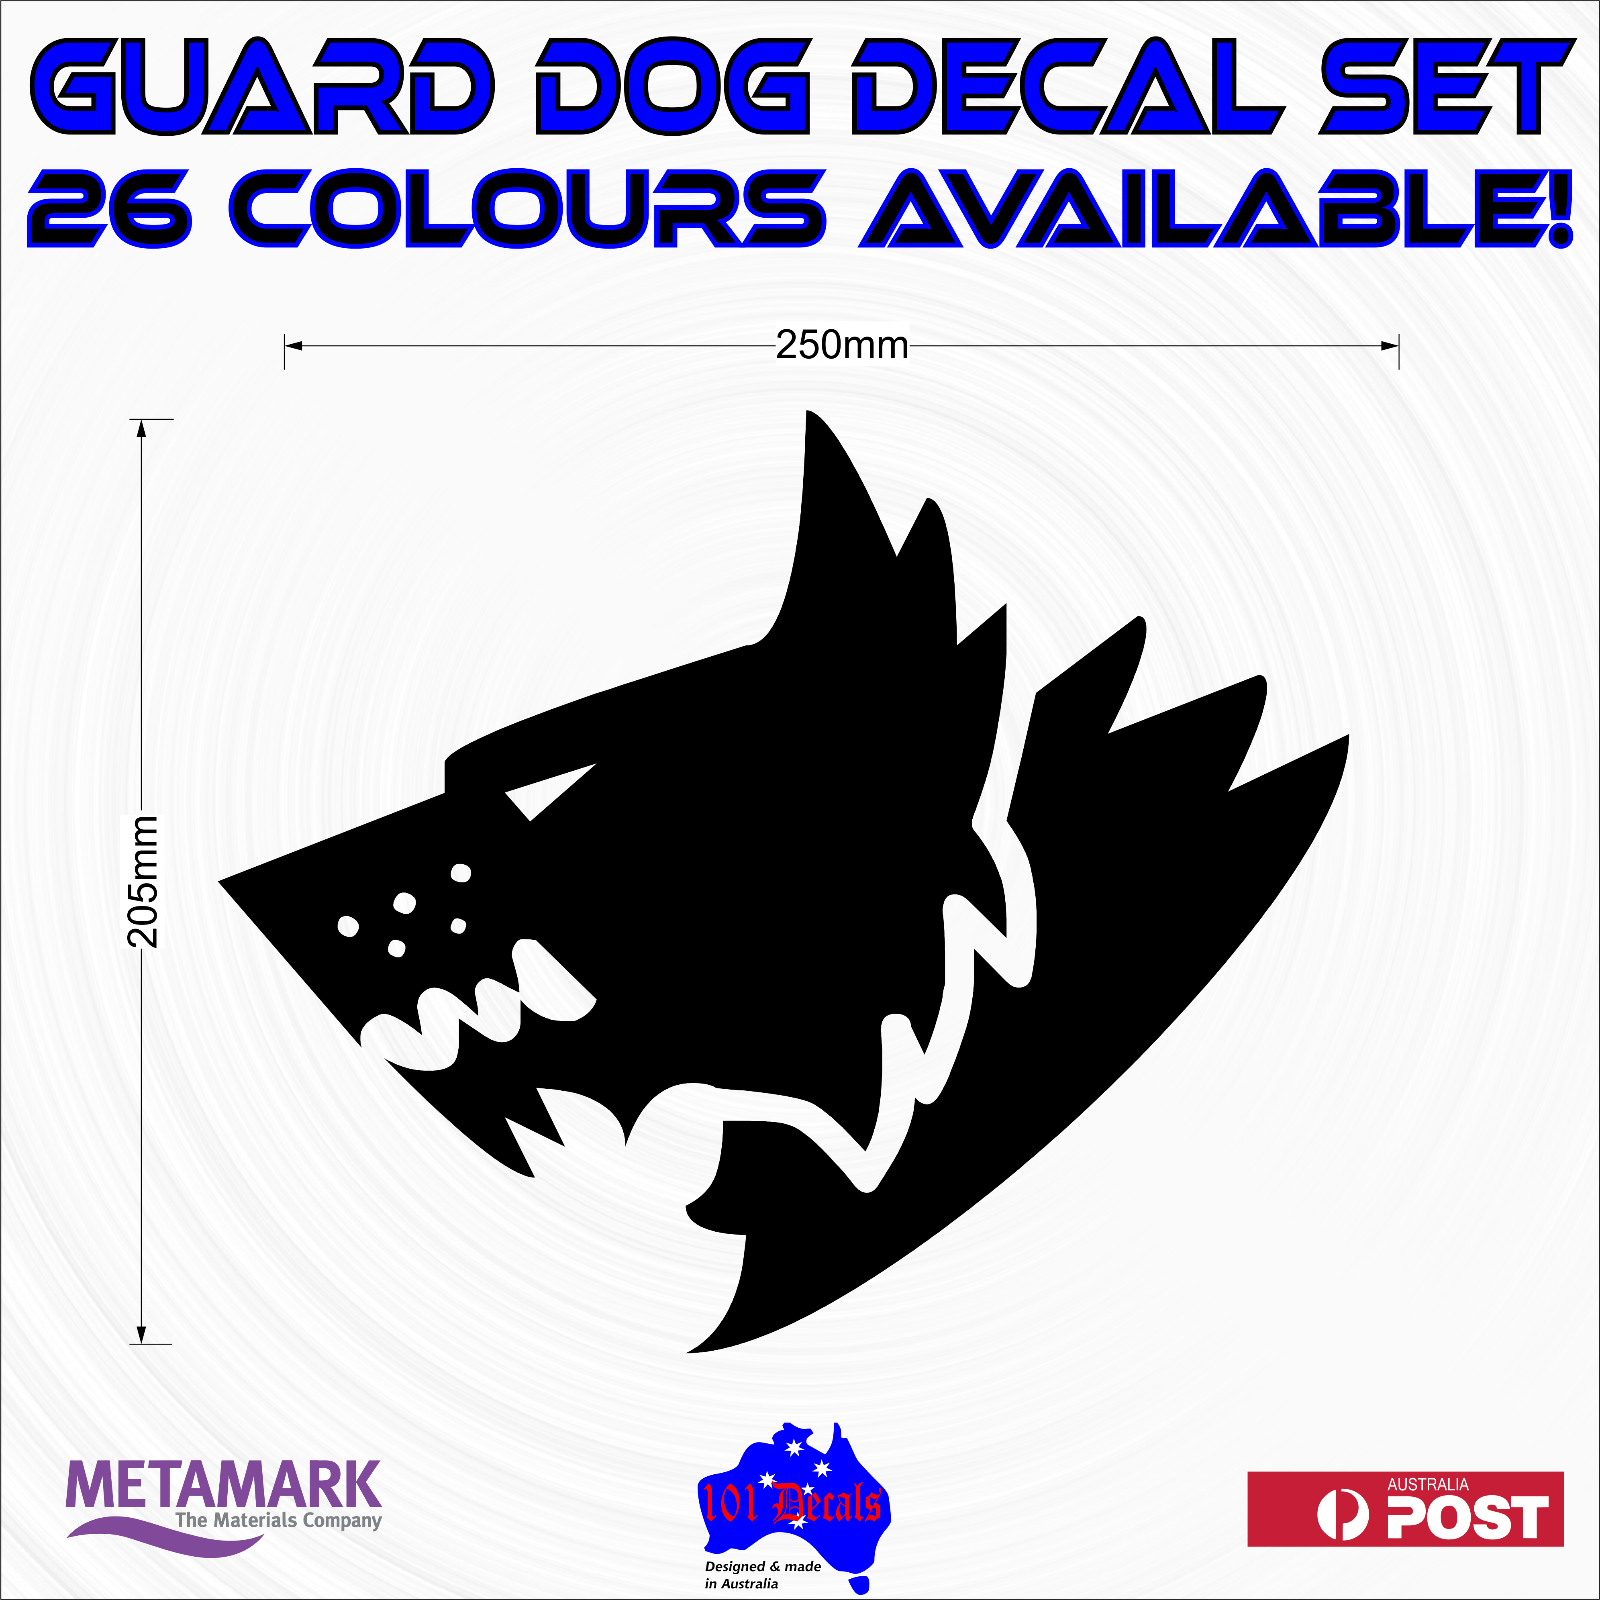 2x EAGLE decal stickers.Car,Ute,4wd,motorcycle,motorbike,boat,shed,bar graphics!